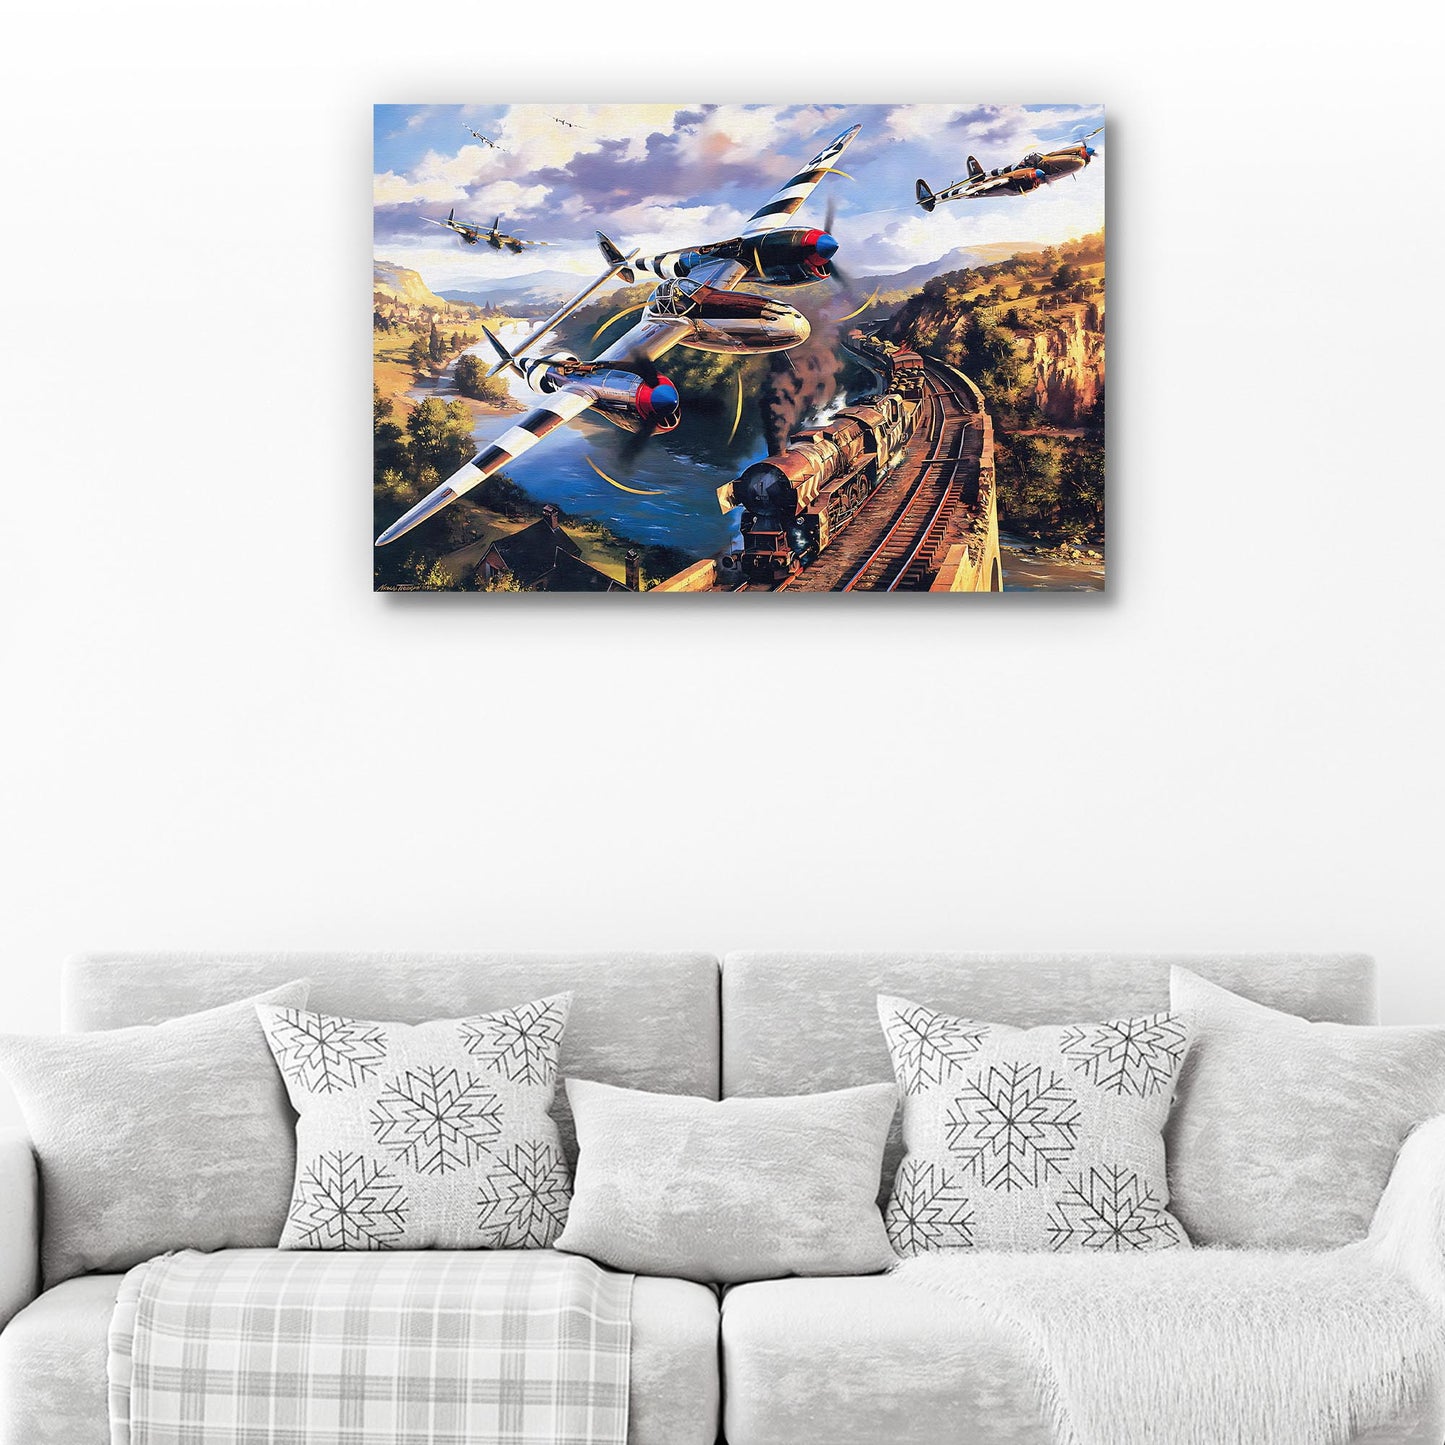 Fighter Plane Lockheed P-38 Lightning Canvas Wall Art - Image by Tailored Canvases